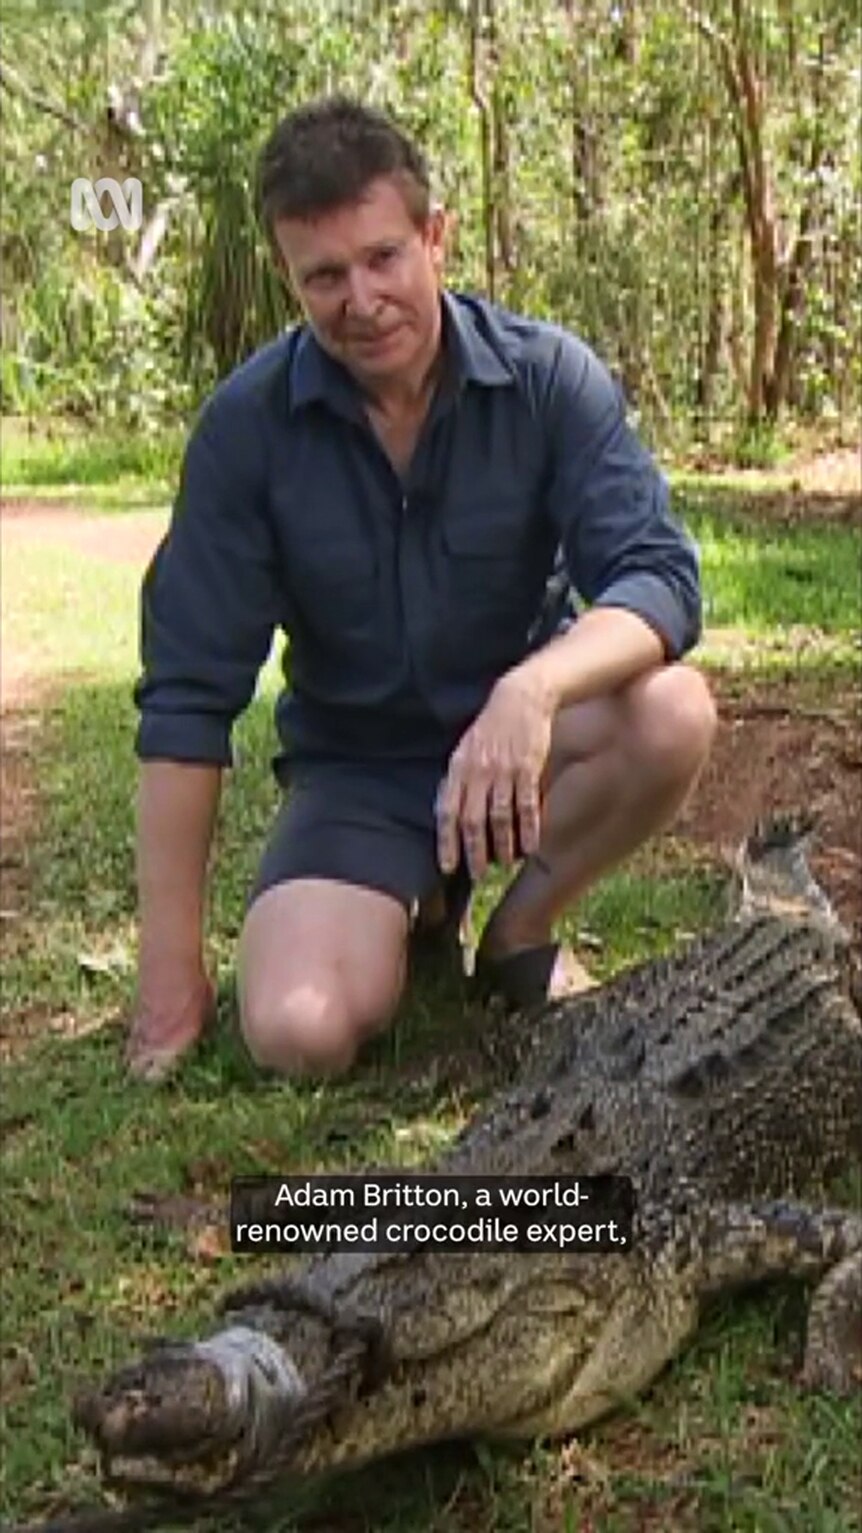 A man with light-tone skin kneels on one knee behind a crocodile with its snout taped shut